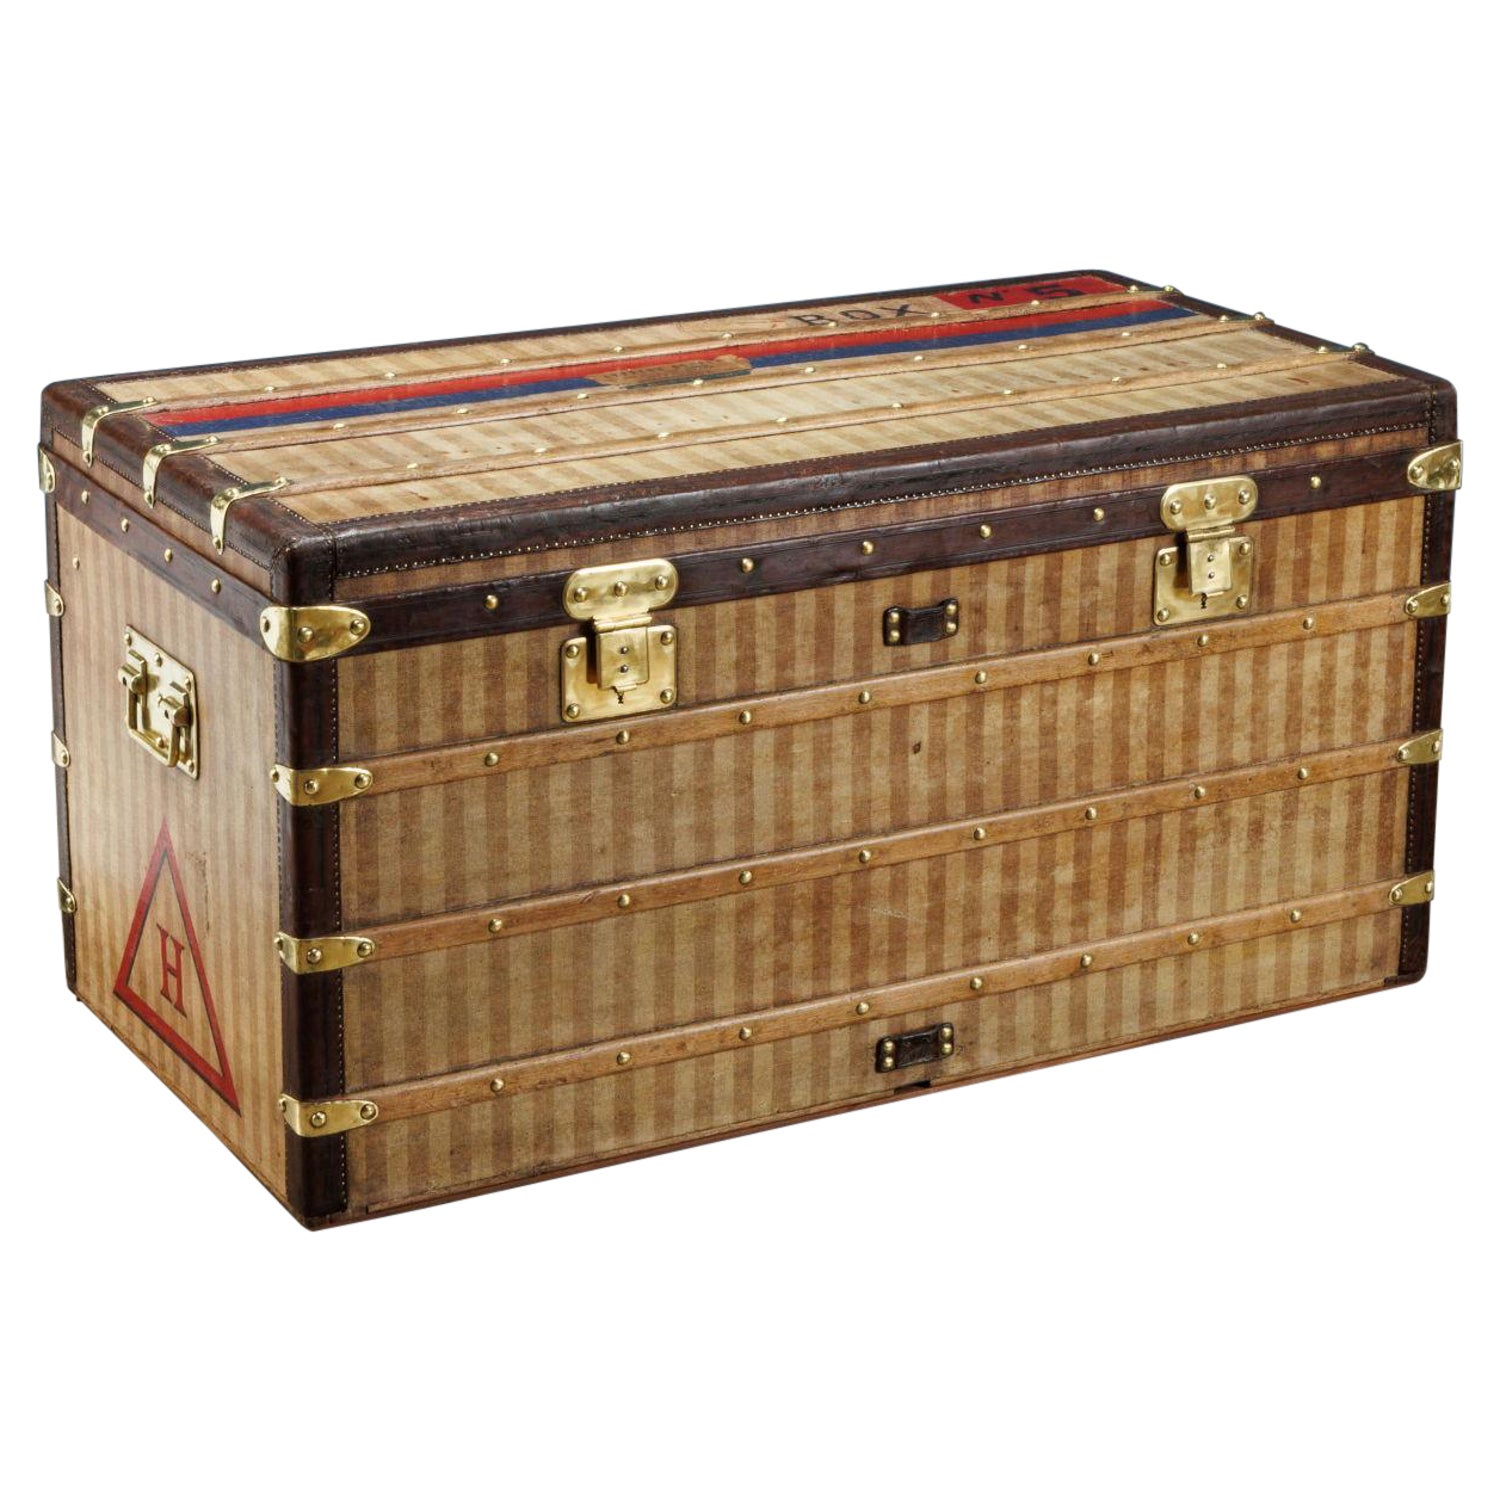 Lot - LOUIS VUITTON STEAMER TRUNK, late 19th century; fitted with